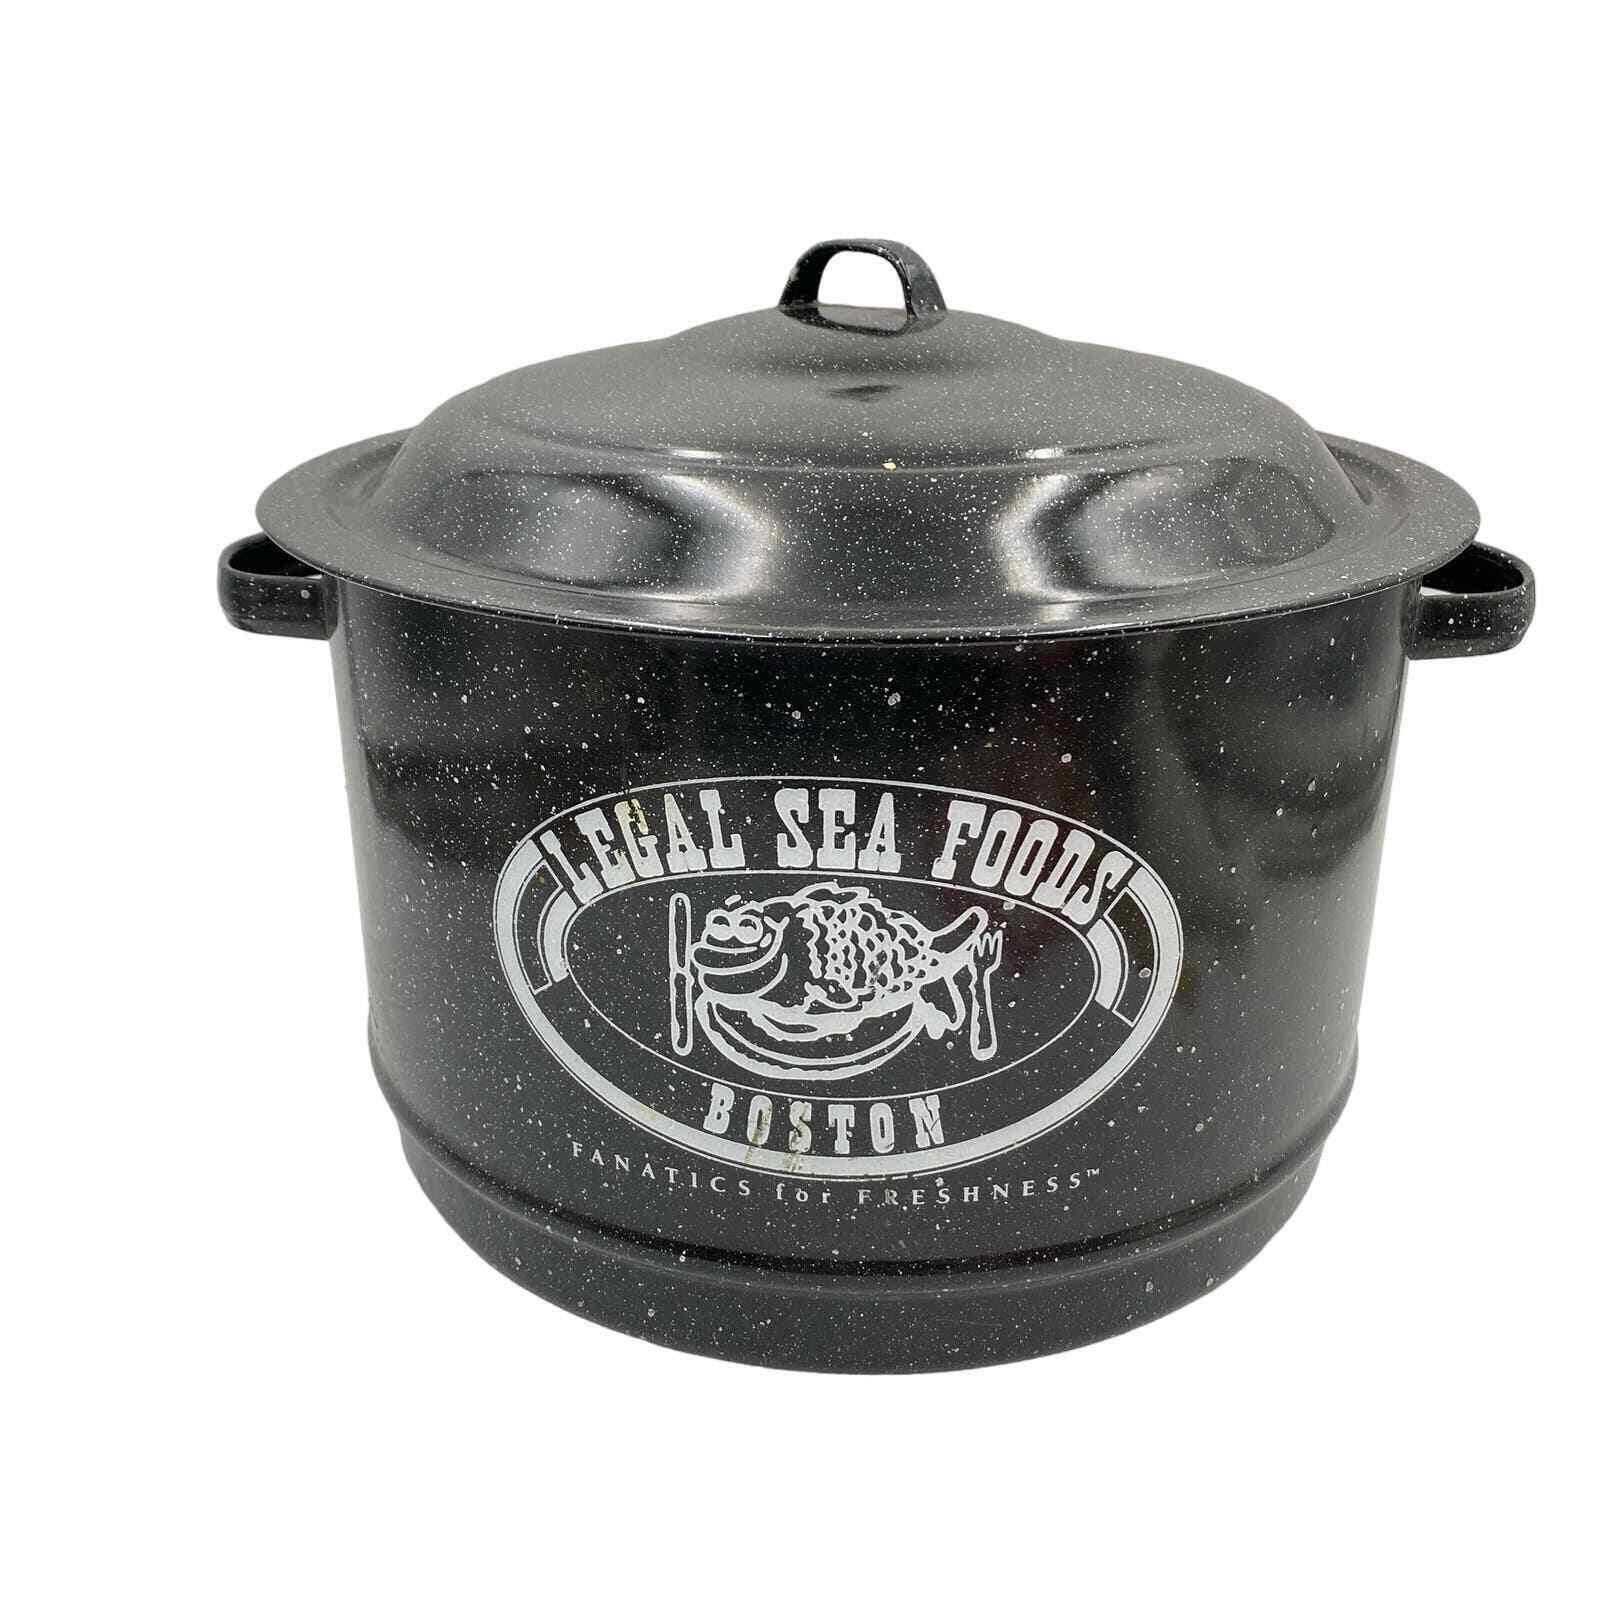 Legal Seafoods Boston Black Speckled Enamelware Stock Pot Canner approx 20 Quart